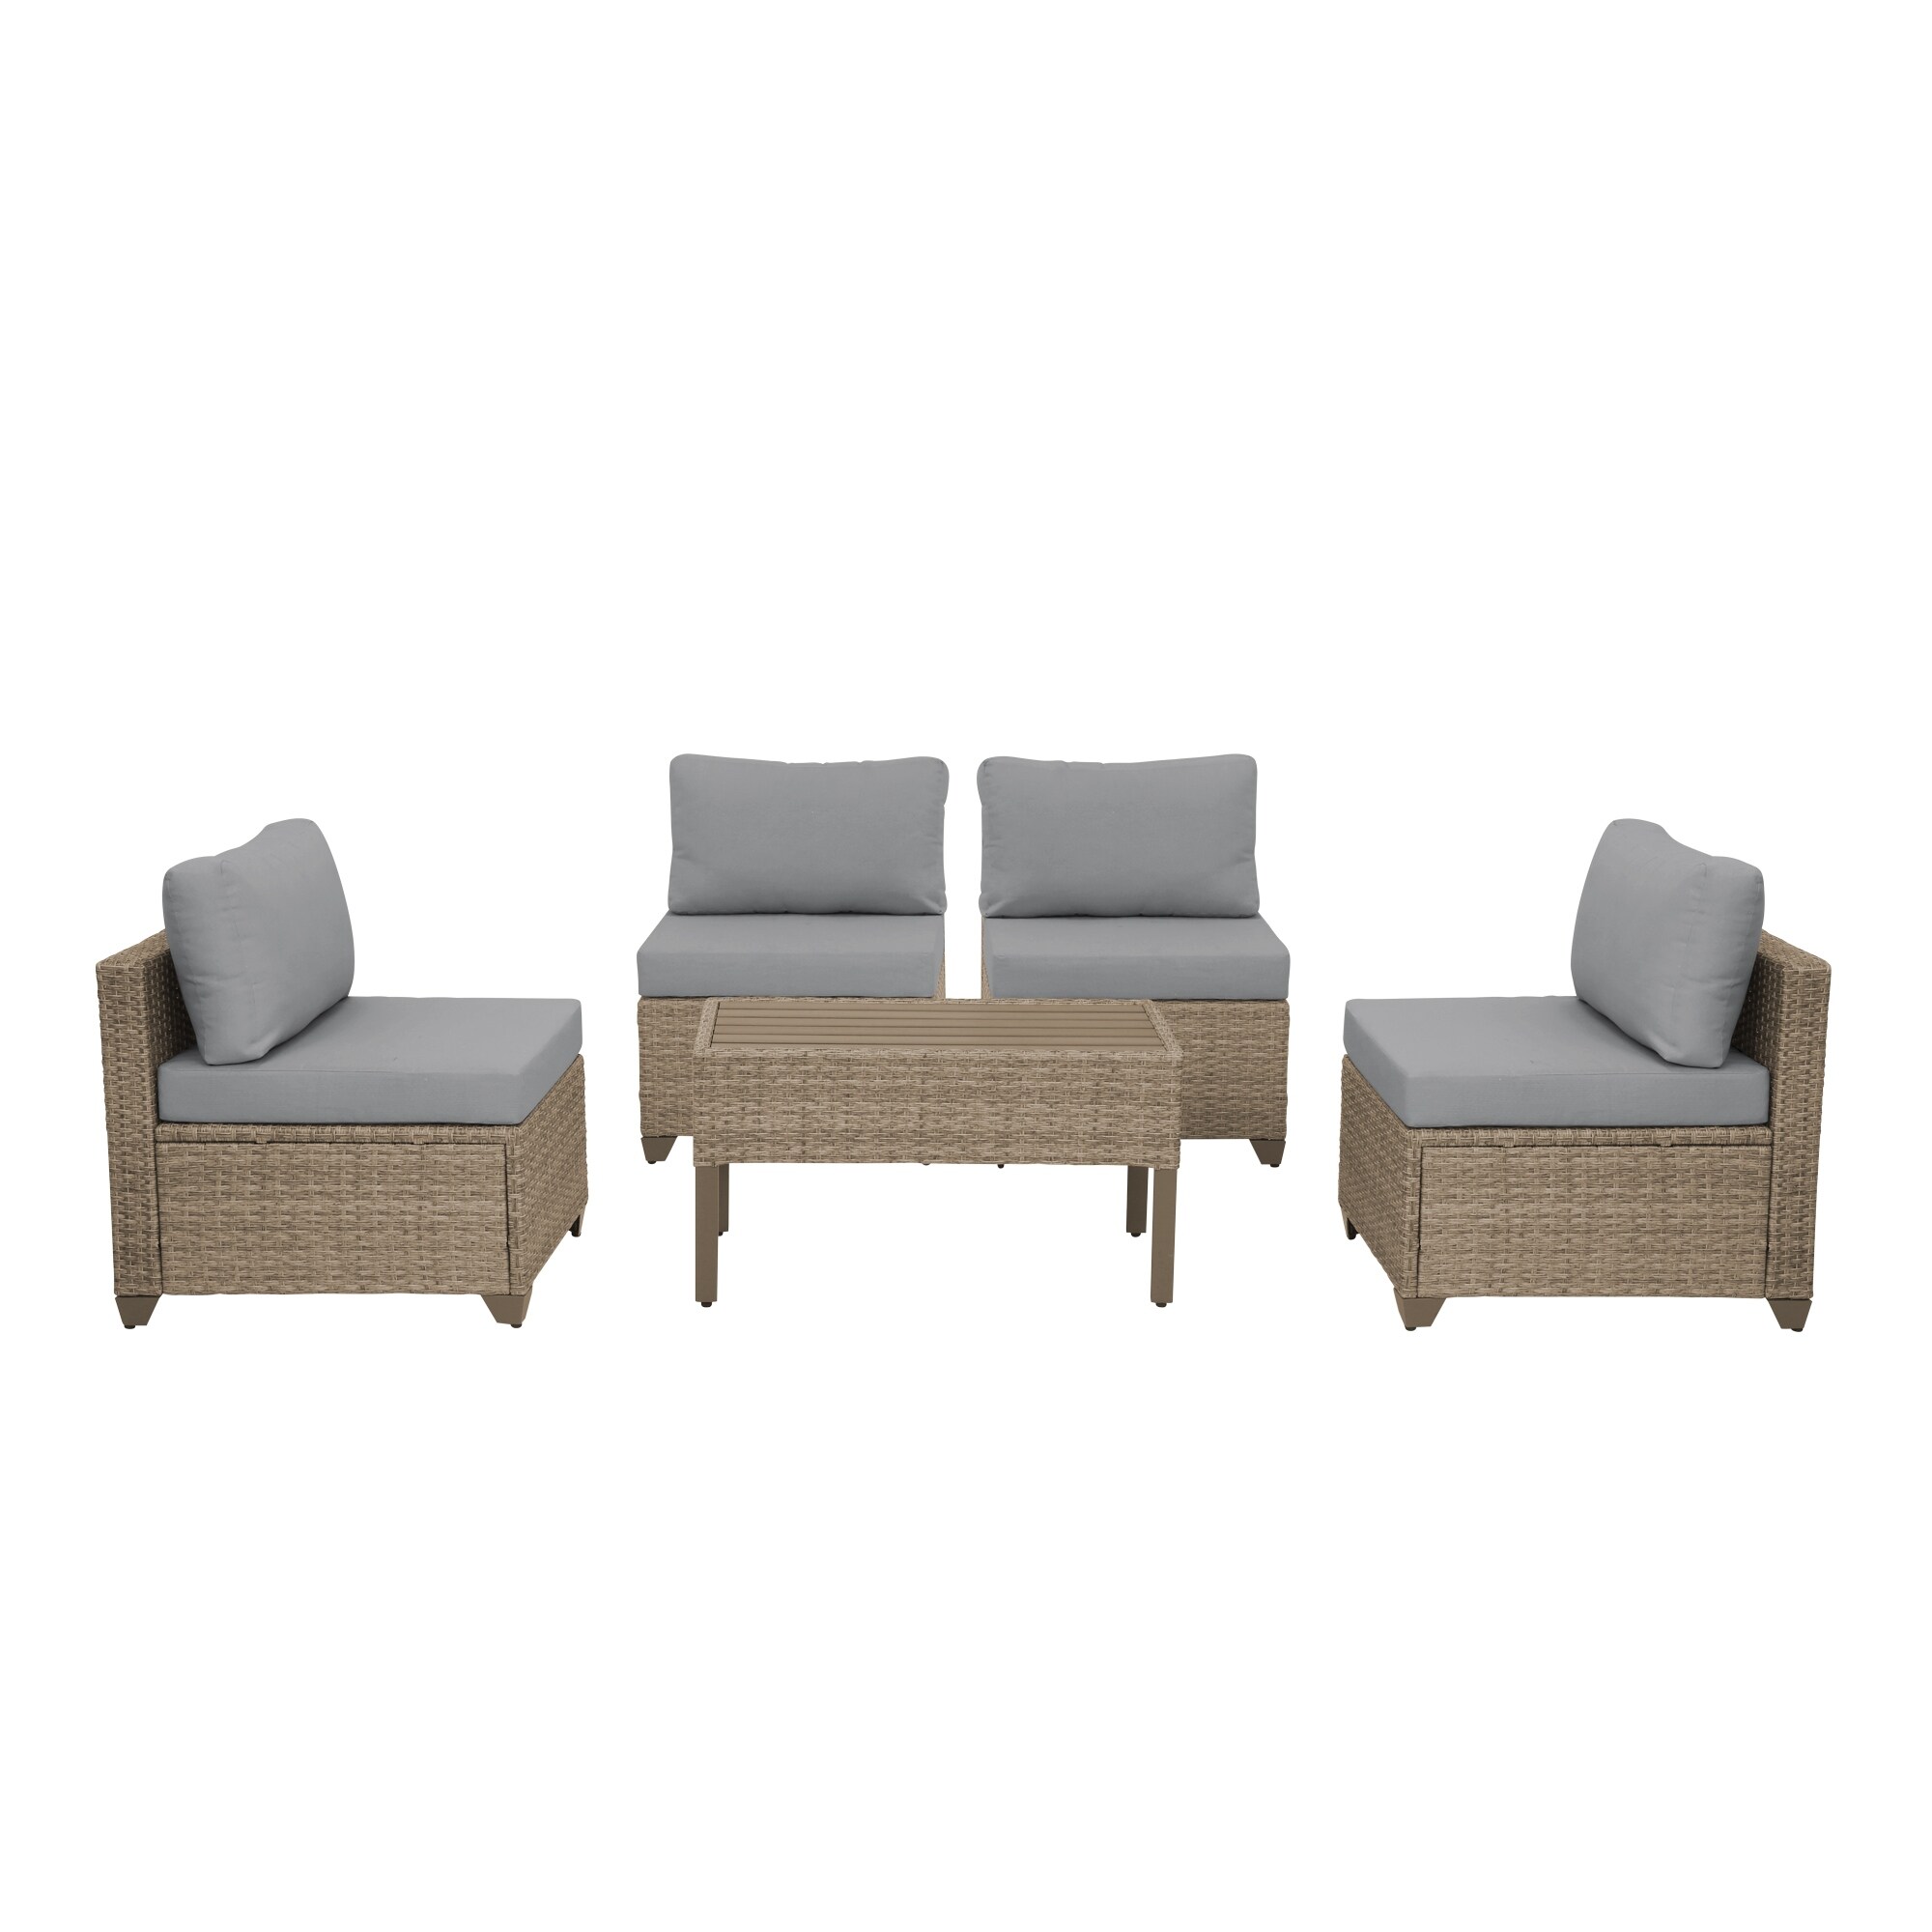 Maui 5-piece Outdoor Conversation Set Including 4 Armless Sofa Seats And Coffee Table In Natural Aged Wicker